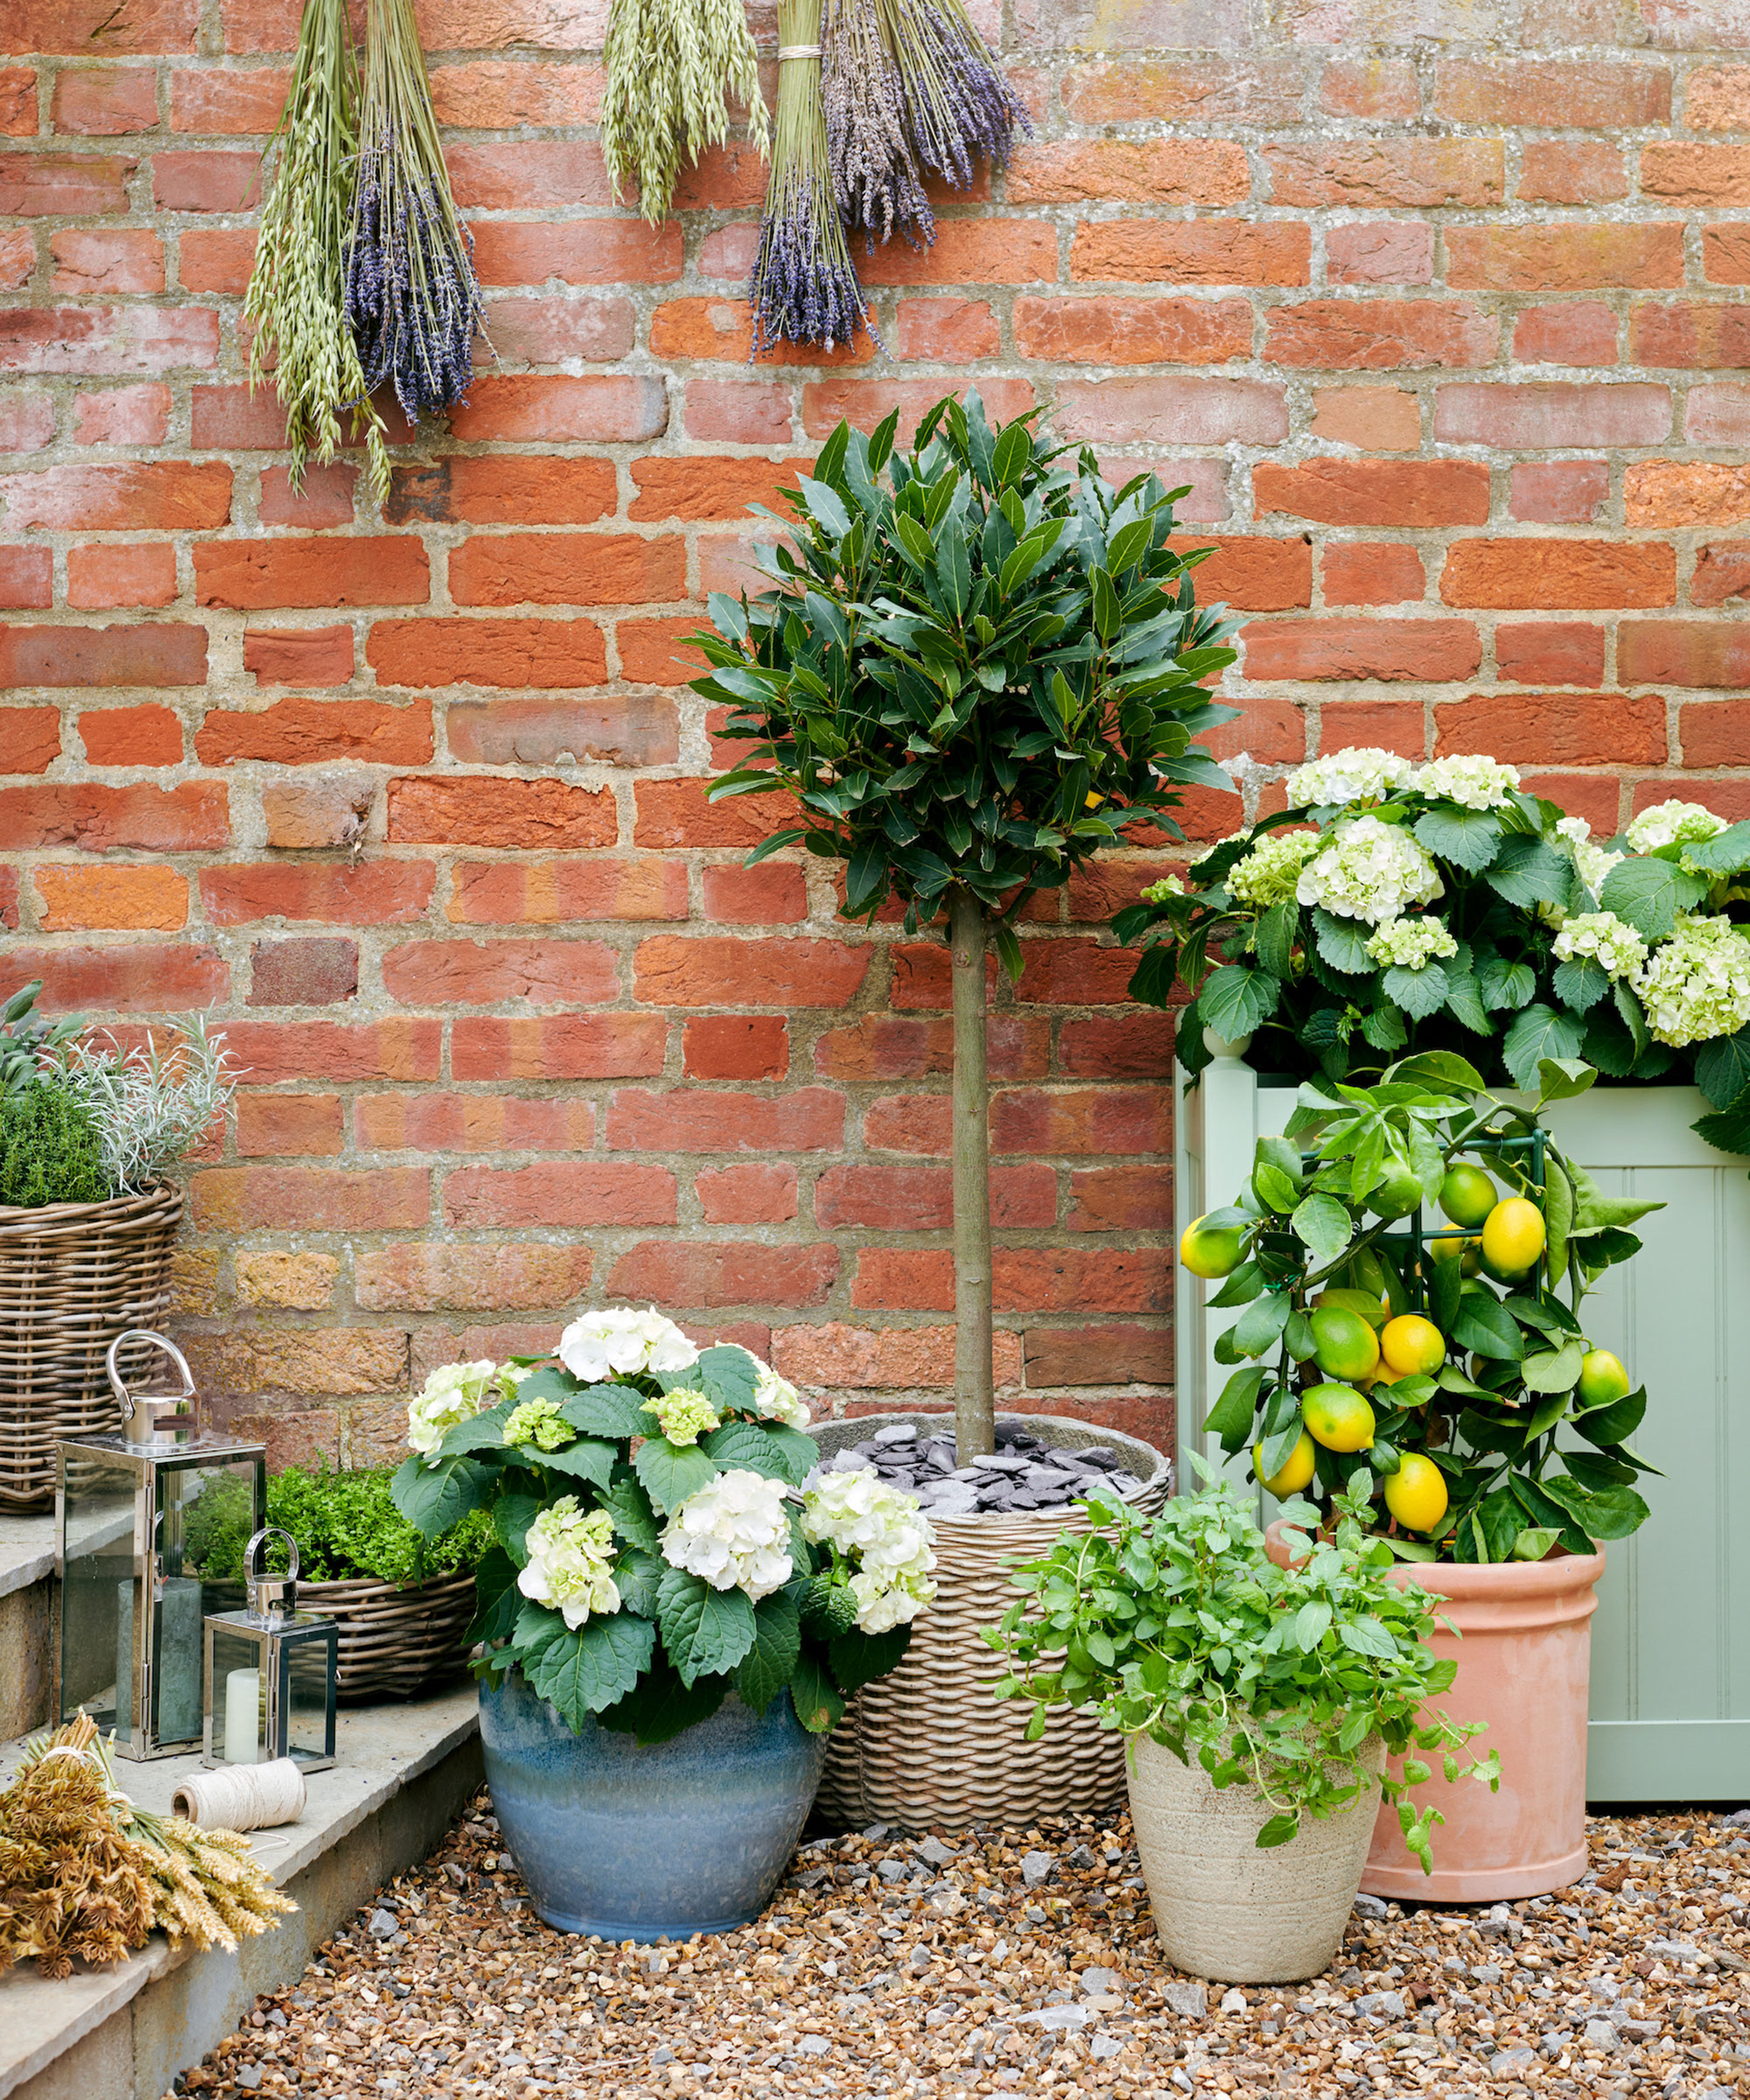 Plants and trees in plant pots along wall in small gravelled garden